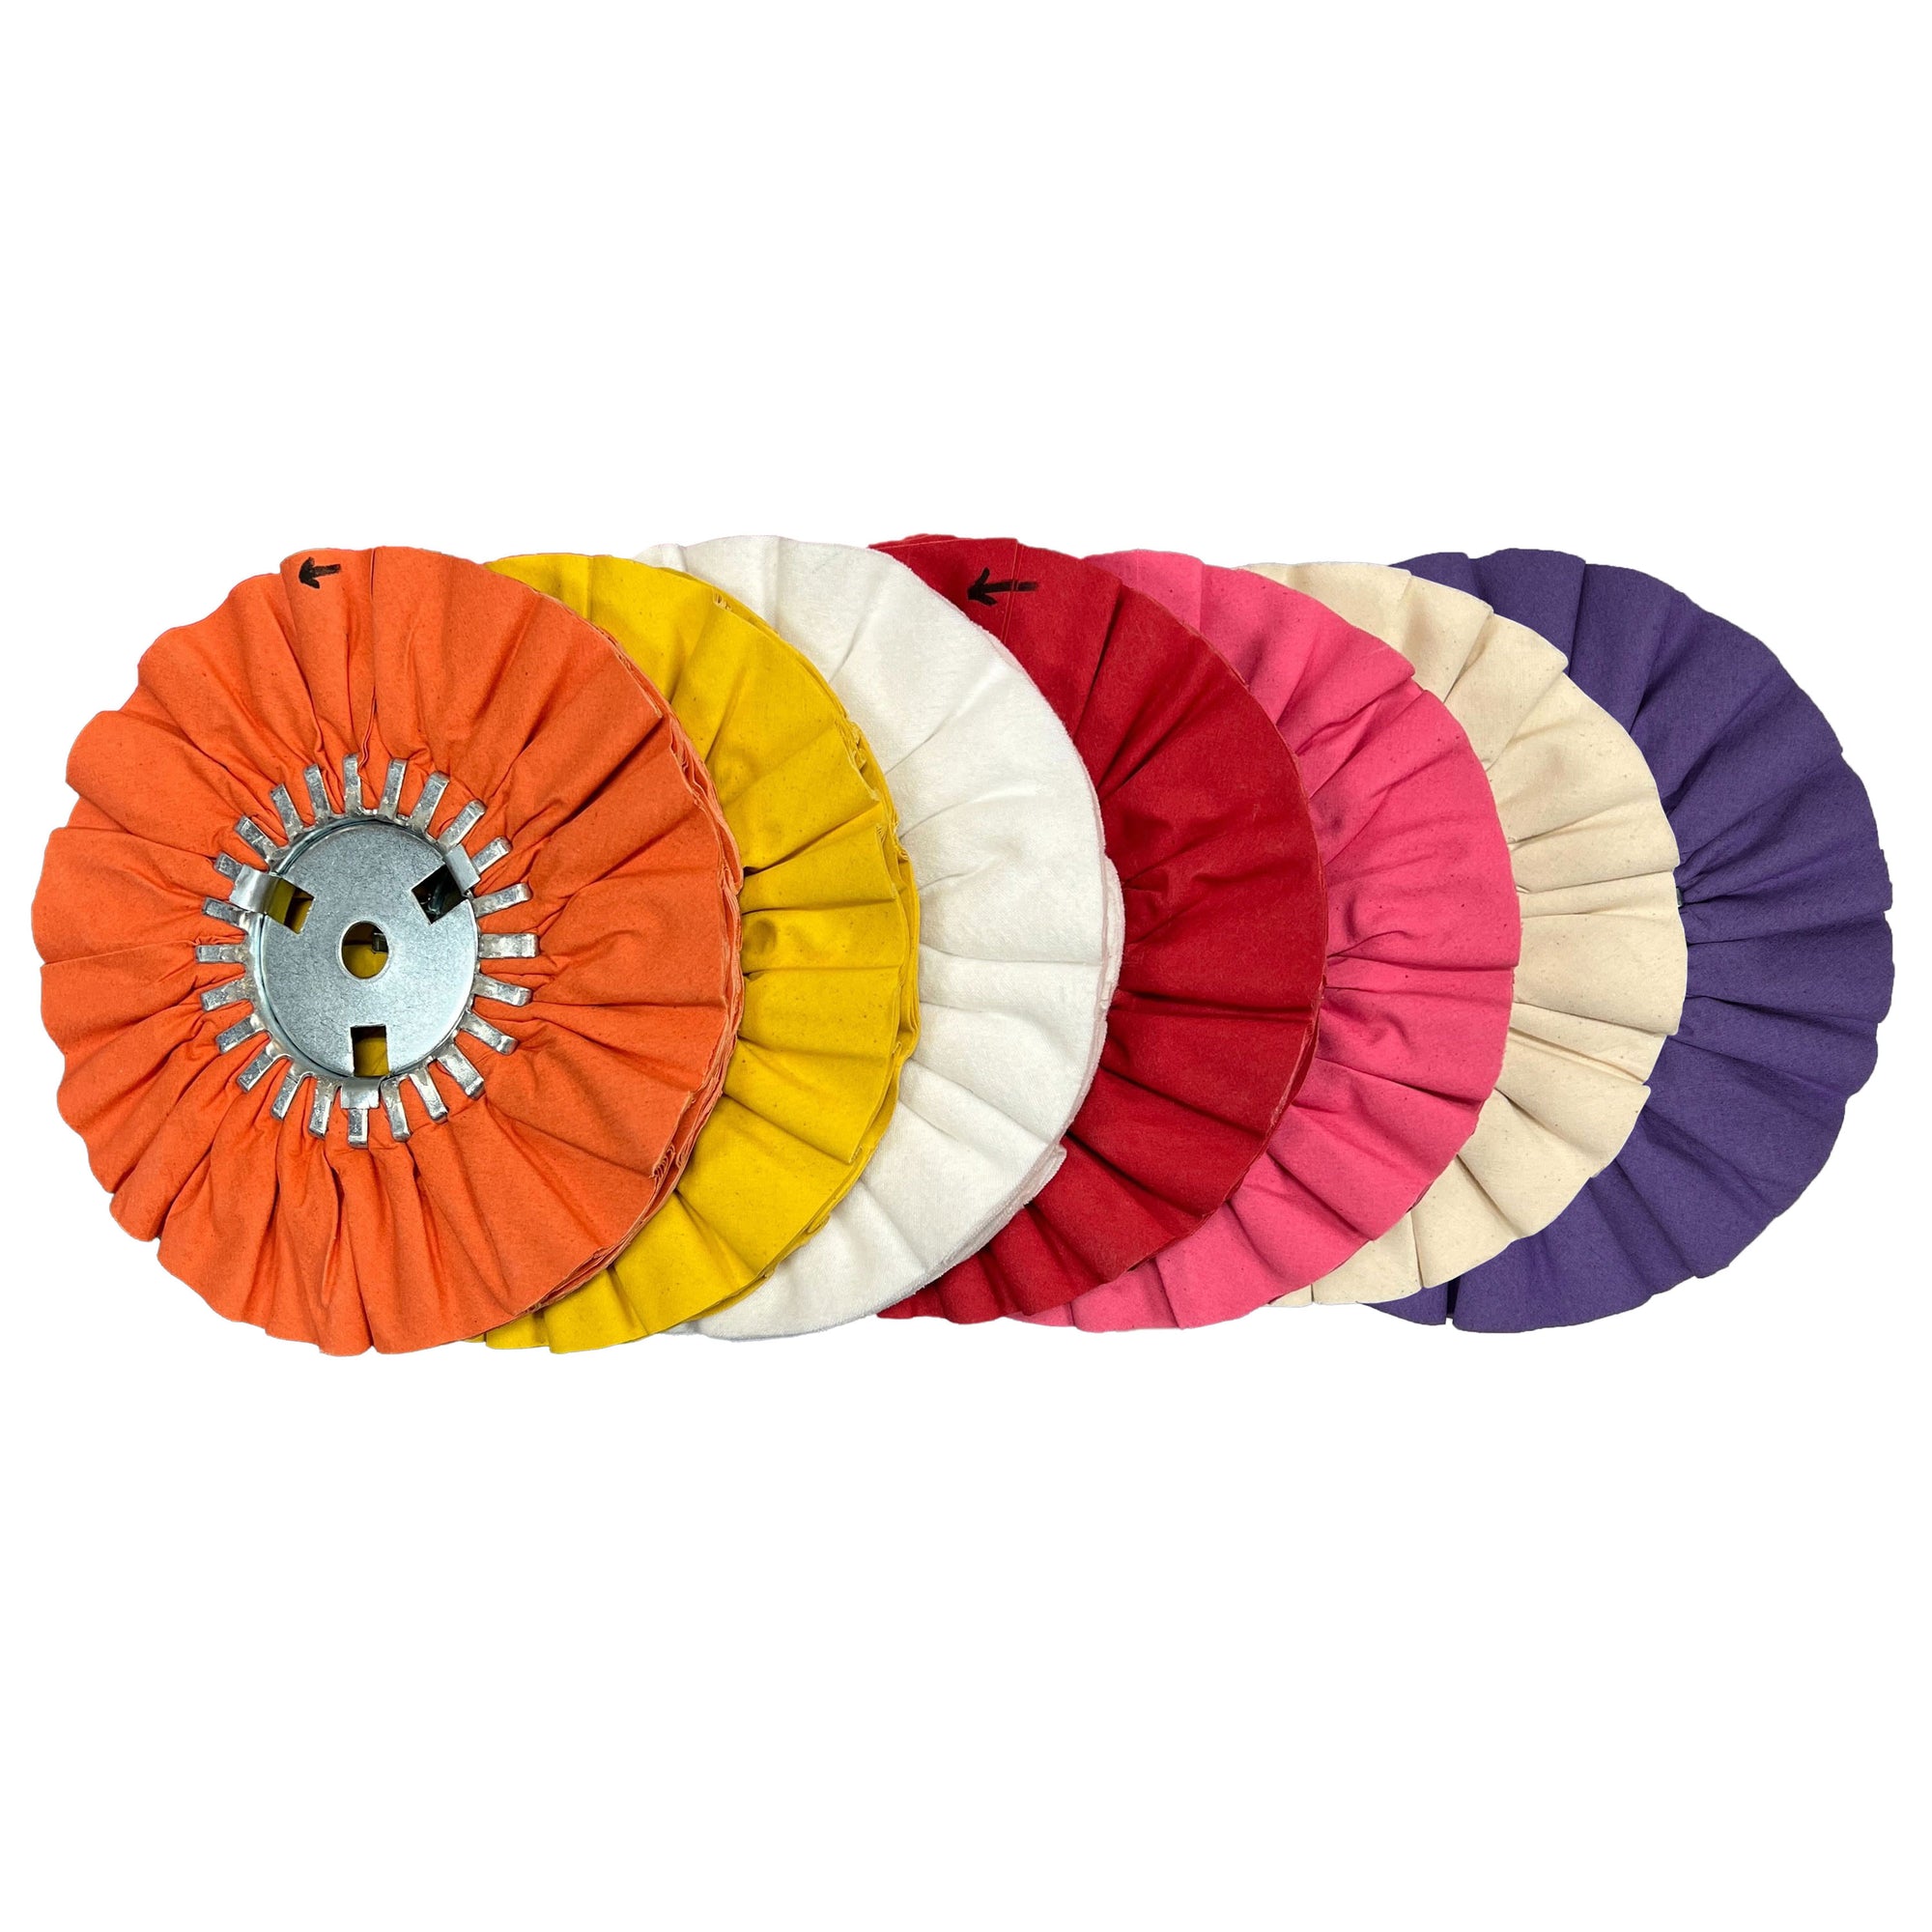 Assortment of 9-inch Airway Buffing Wheels from Renegade Products USA, providing a versatile range of options for achieving professional polishing results on various surfaces.